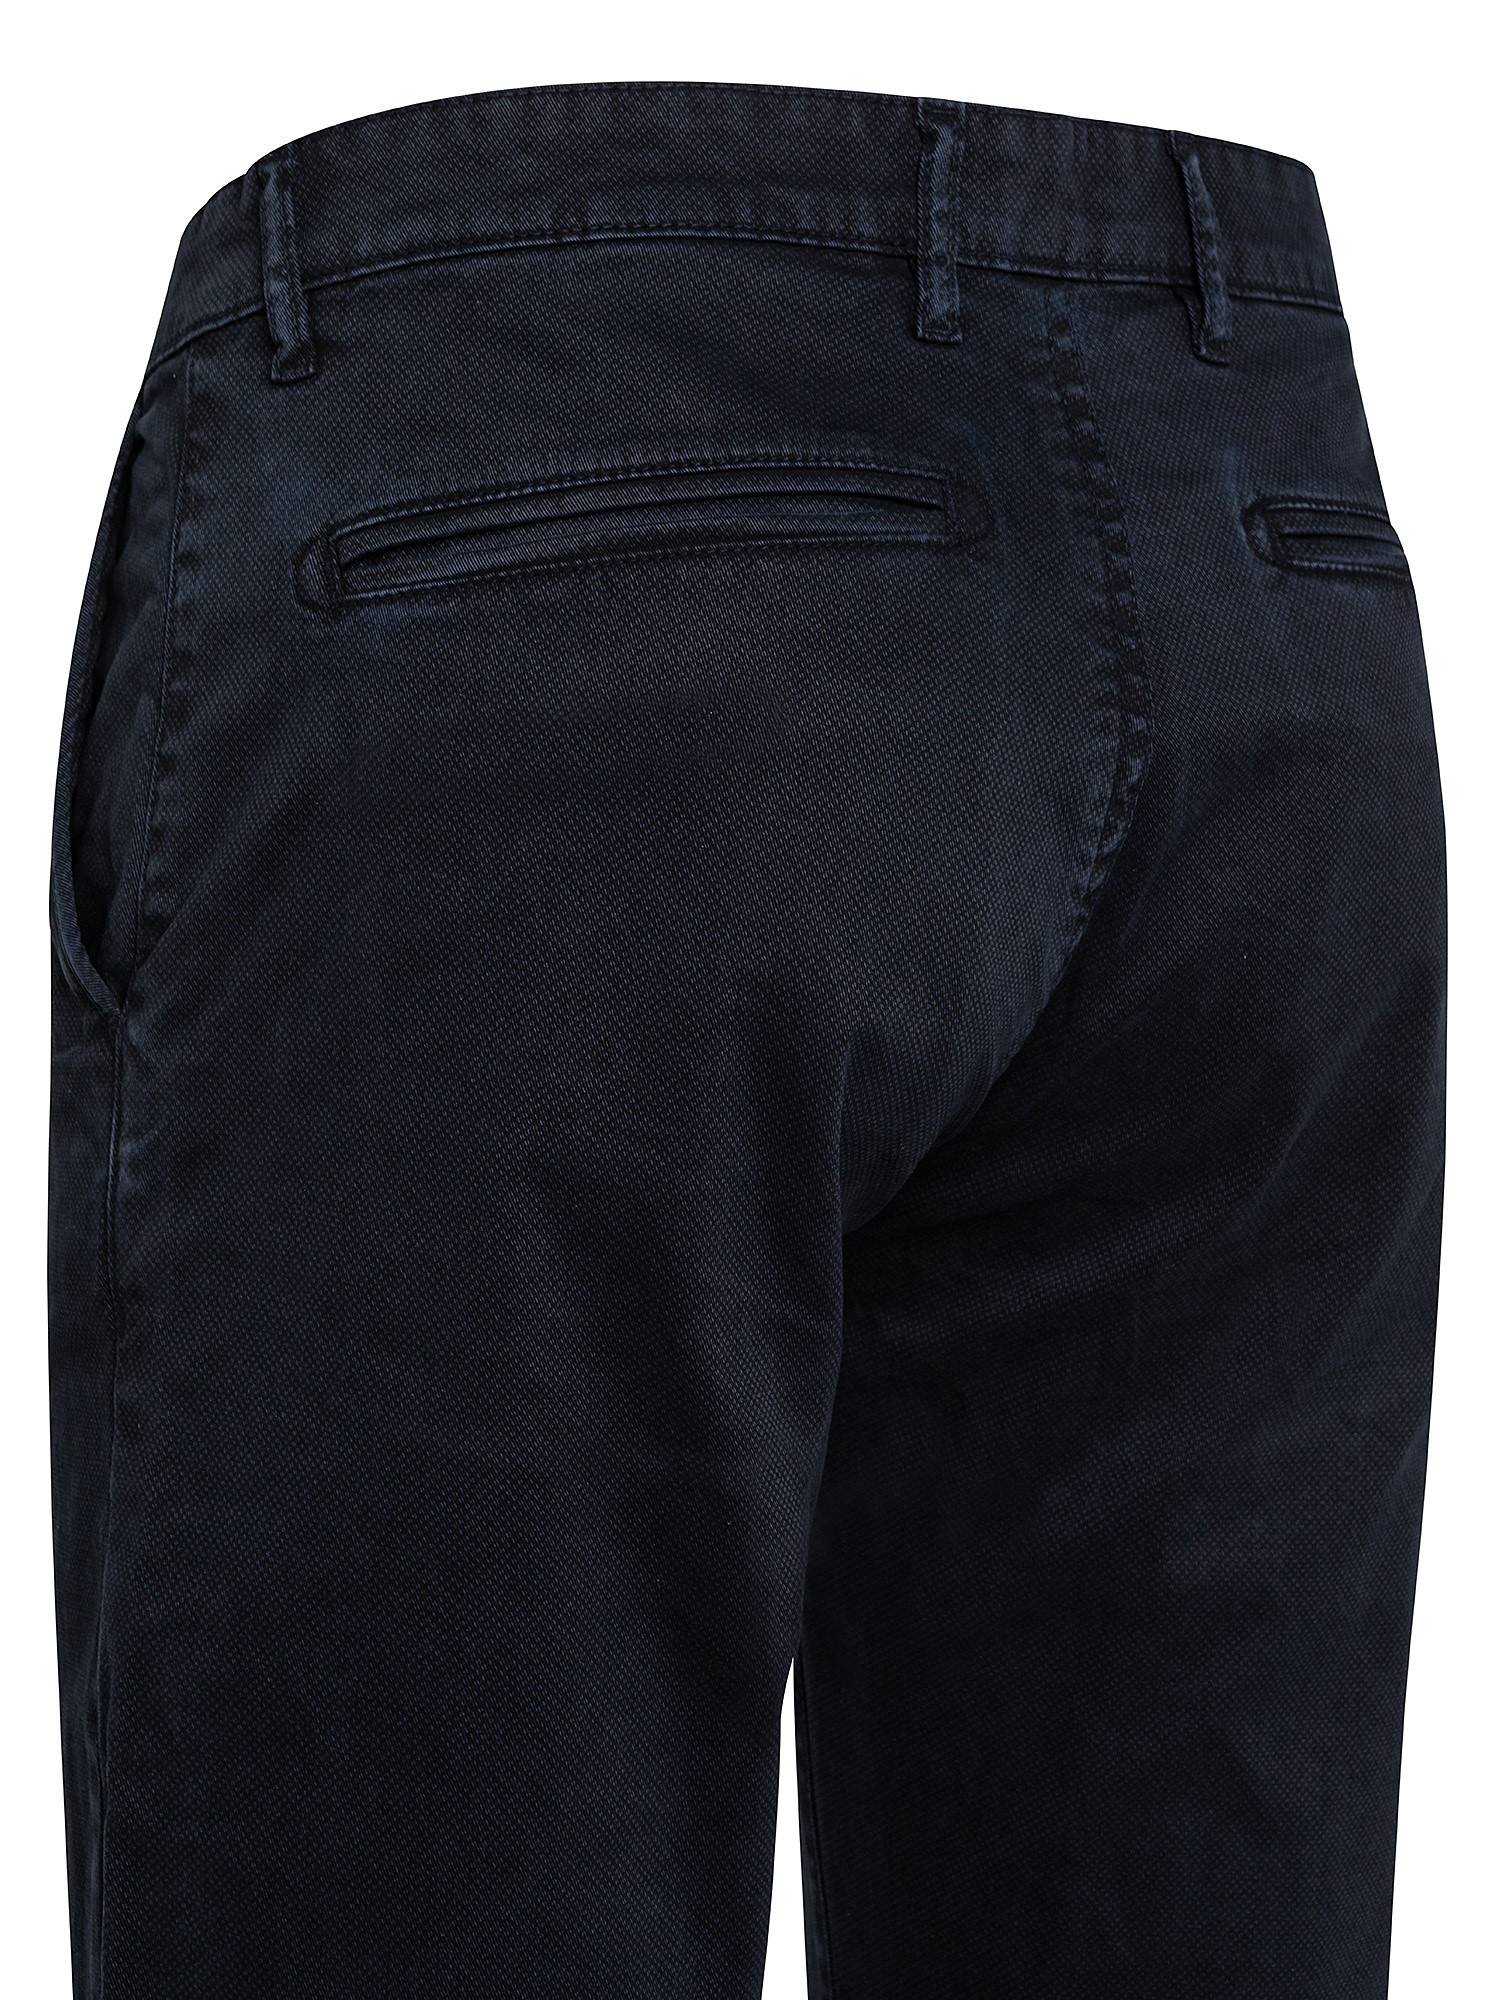 Stretch cotton chinos trousers, Dark Blue, large image number 2